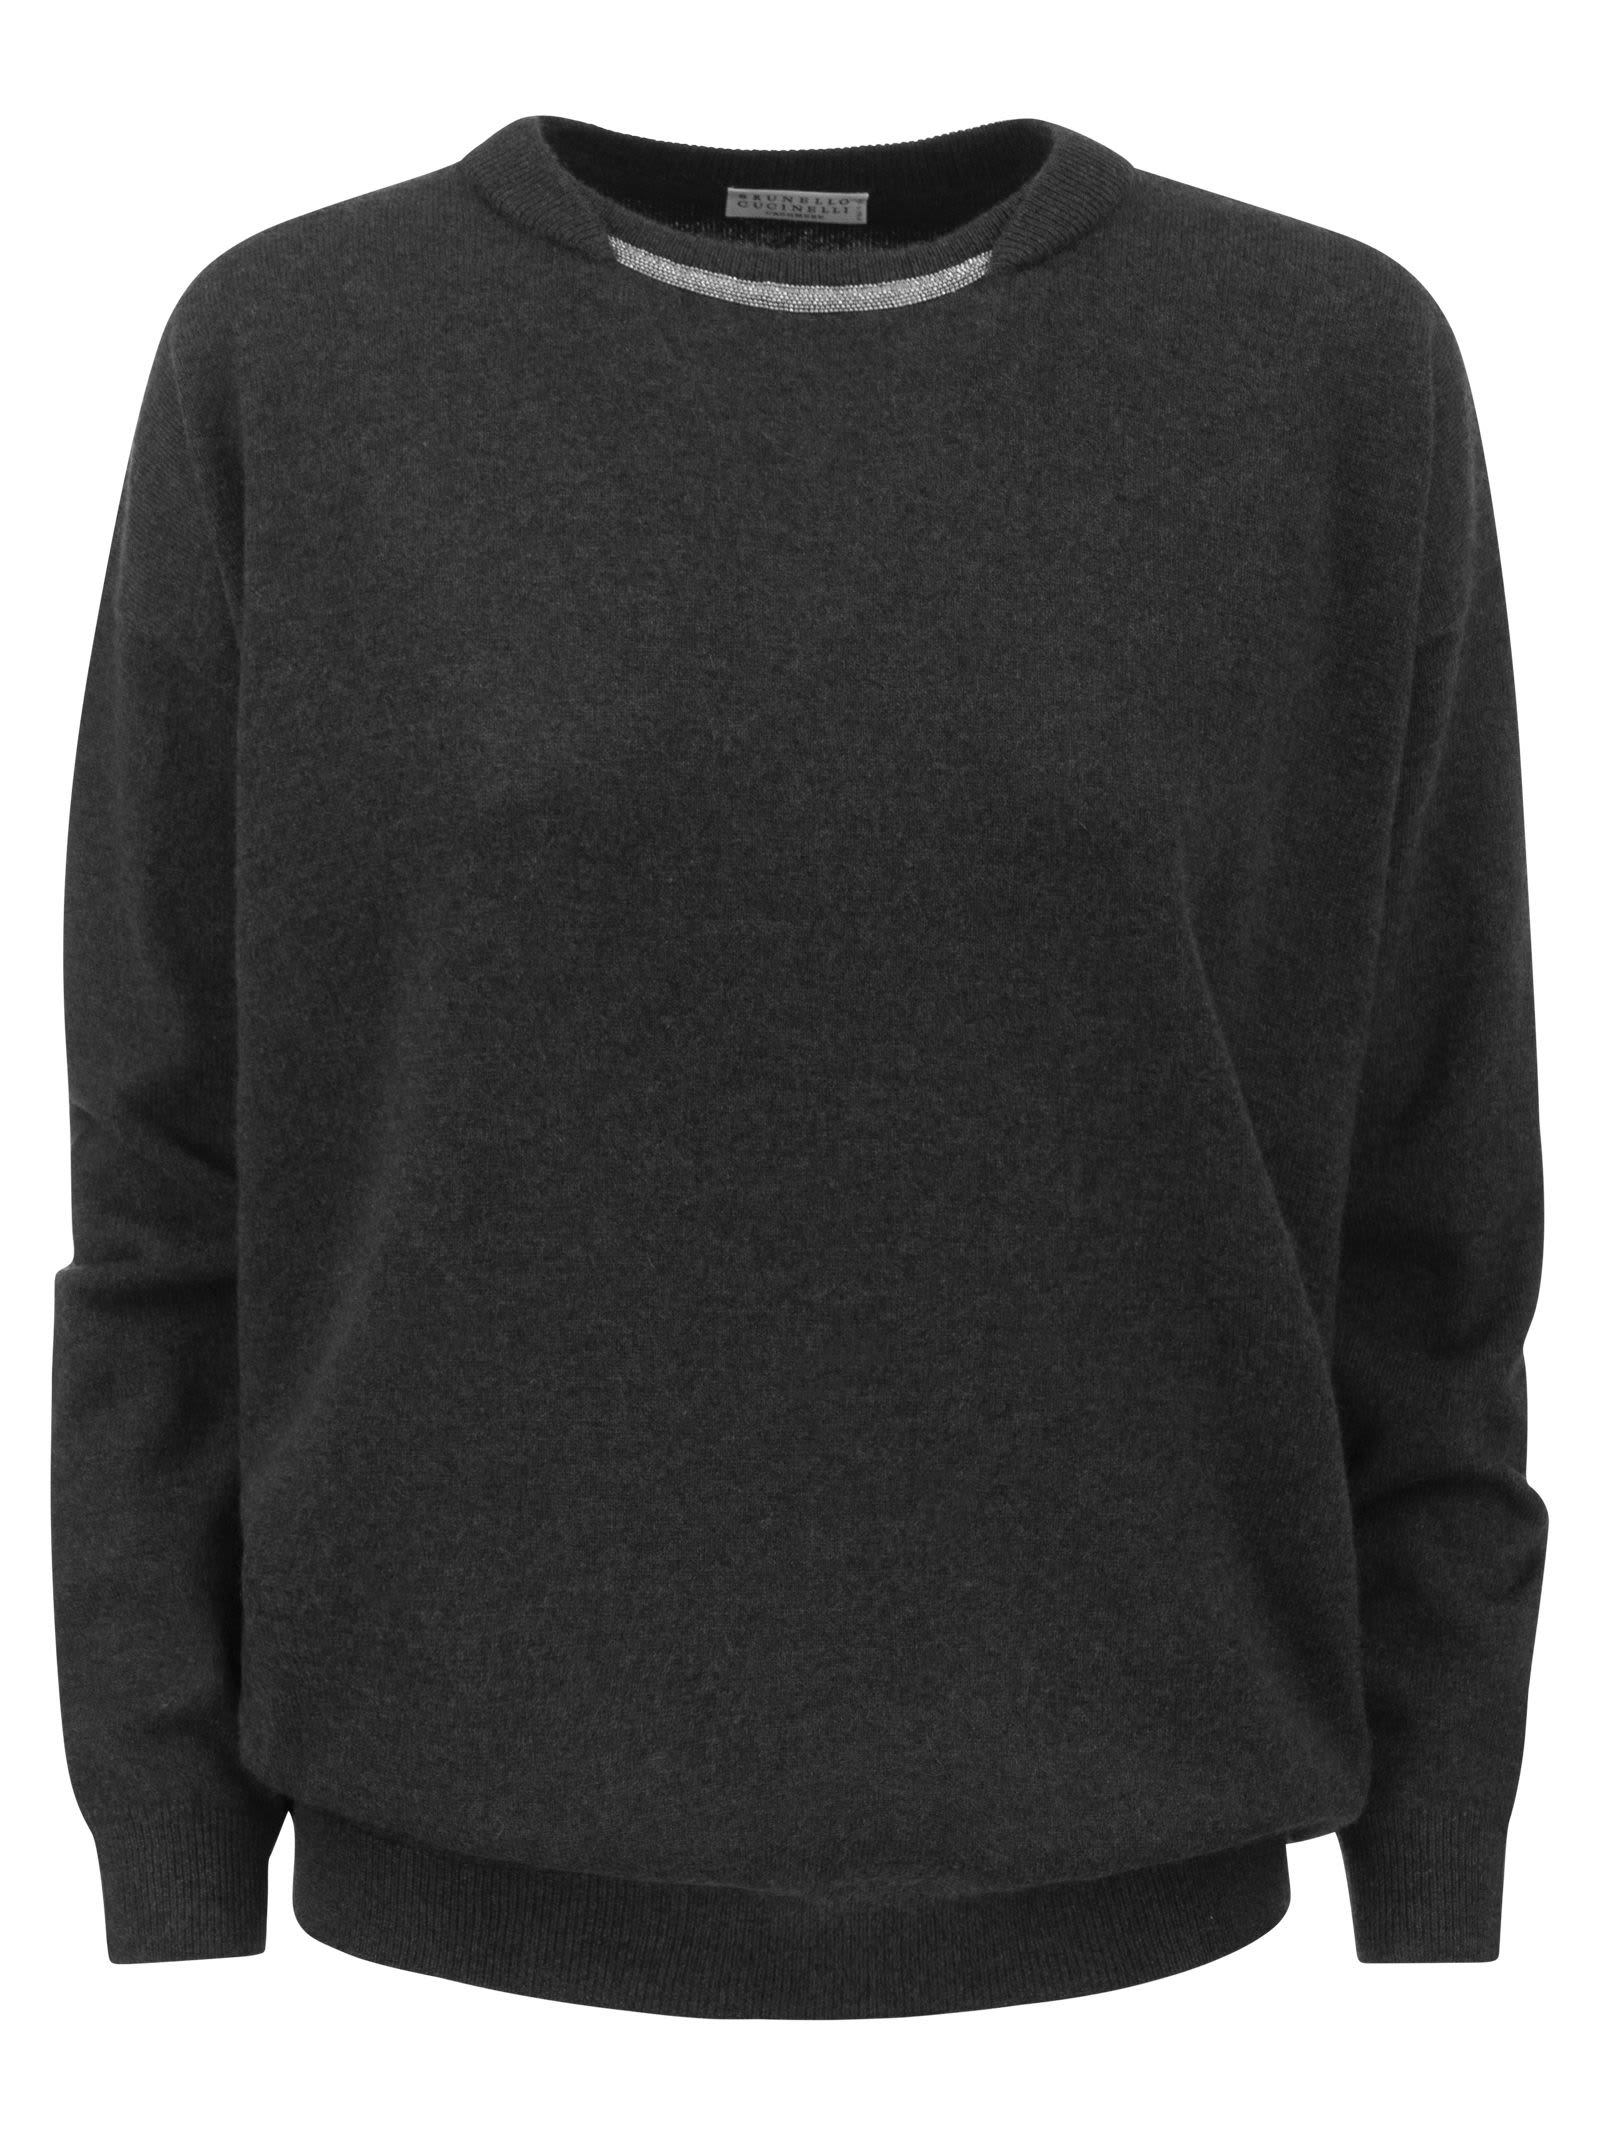 Brunello Cucinelli Cashmere Sweater With shiny Neck Detail